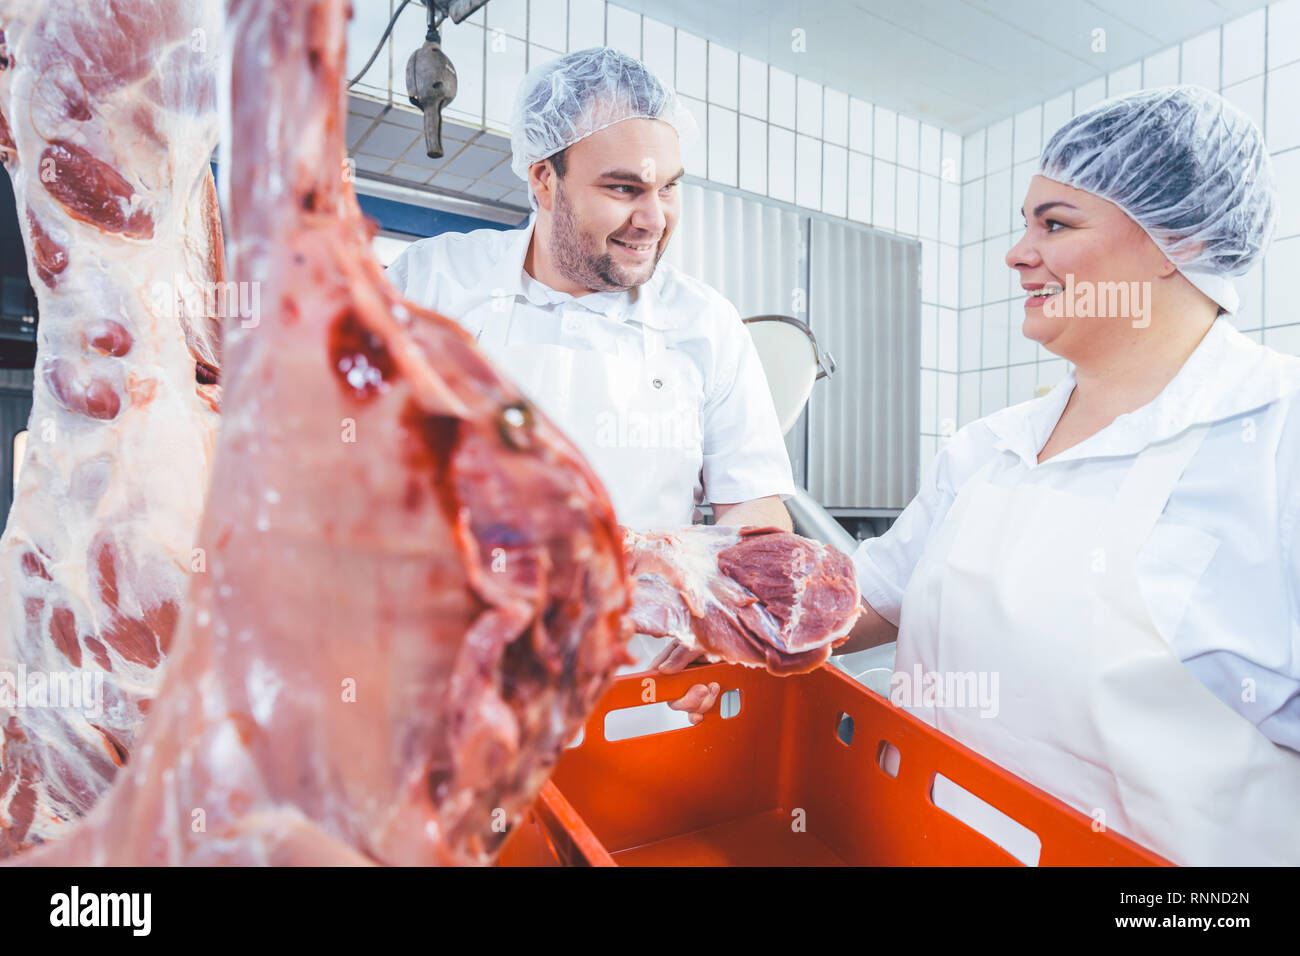 Team of butchers working with meat in butchery Stock Photo